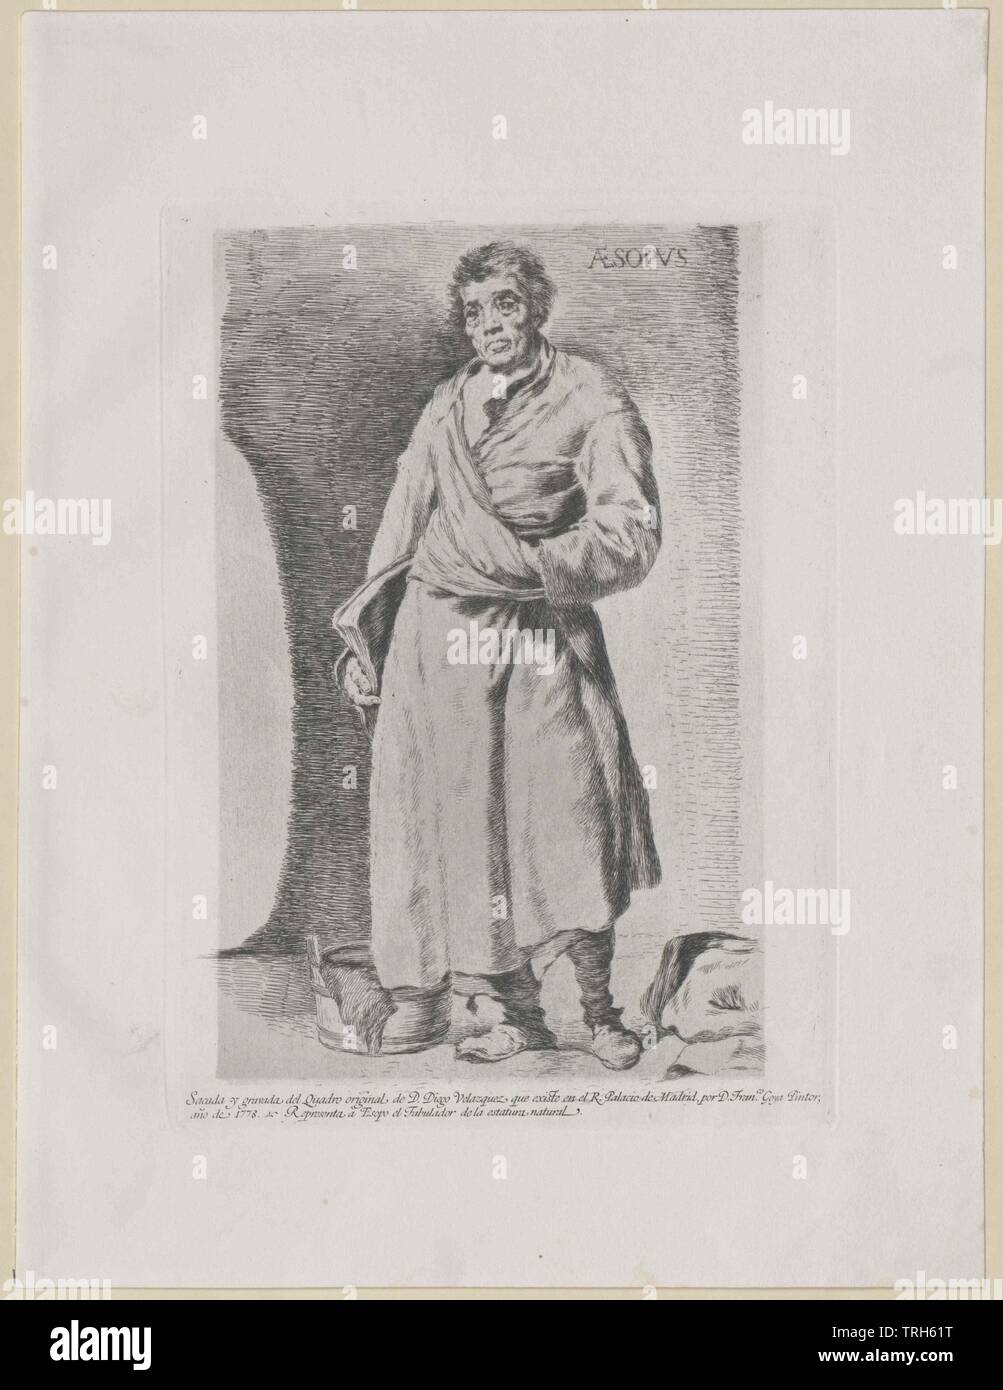 Aesop,personality, celebrities, further, other, people, full-length, full length, man, men, male, manly, Additional-Rights-Clearance-Info-Not-Available Stock Photo